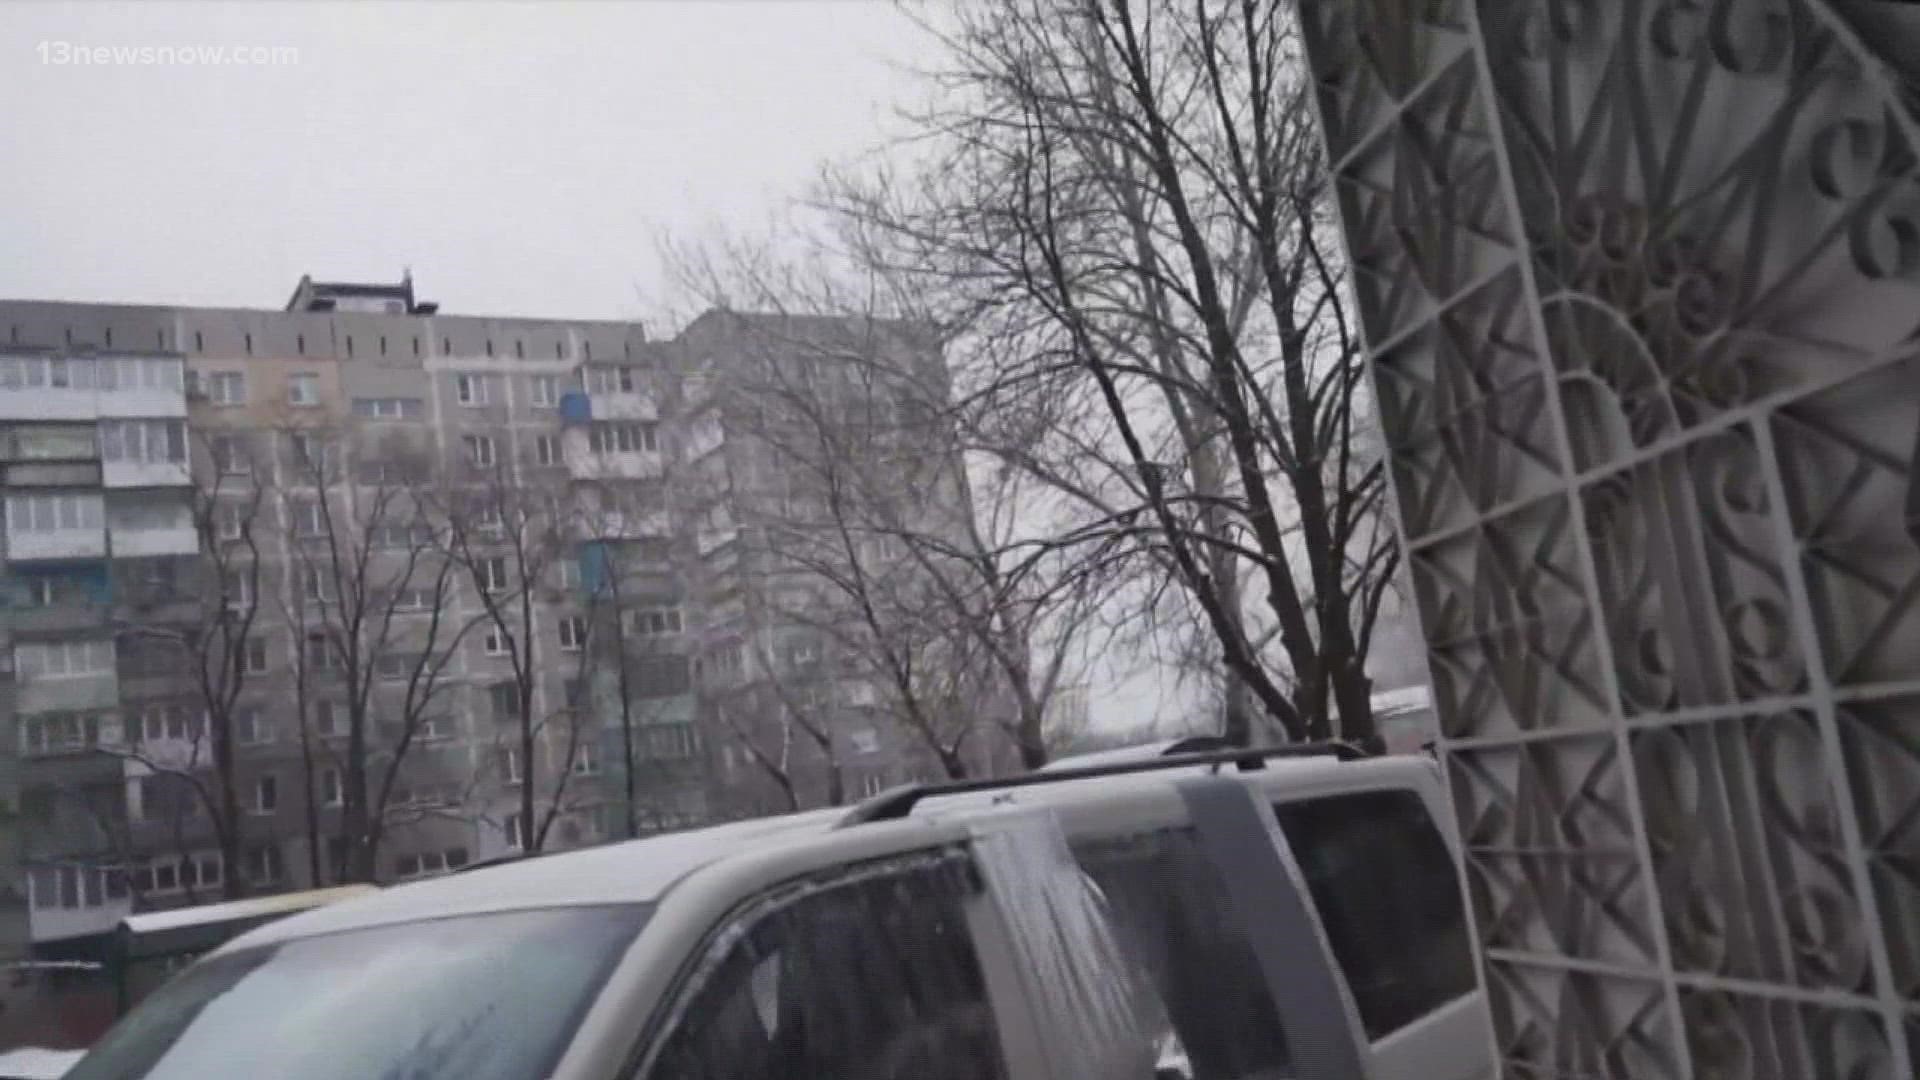 Ukrainian officials say the attack killed 3, including a child, and wounded 17 others.